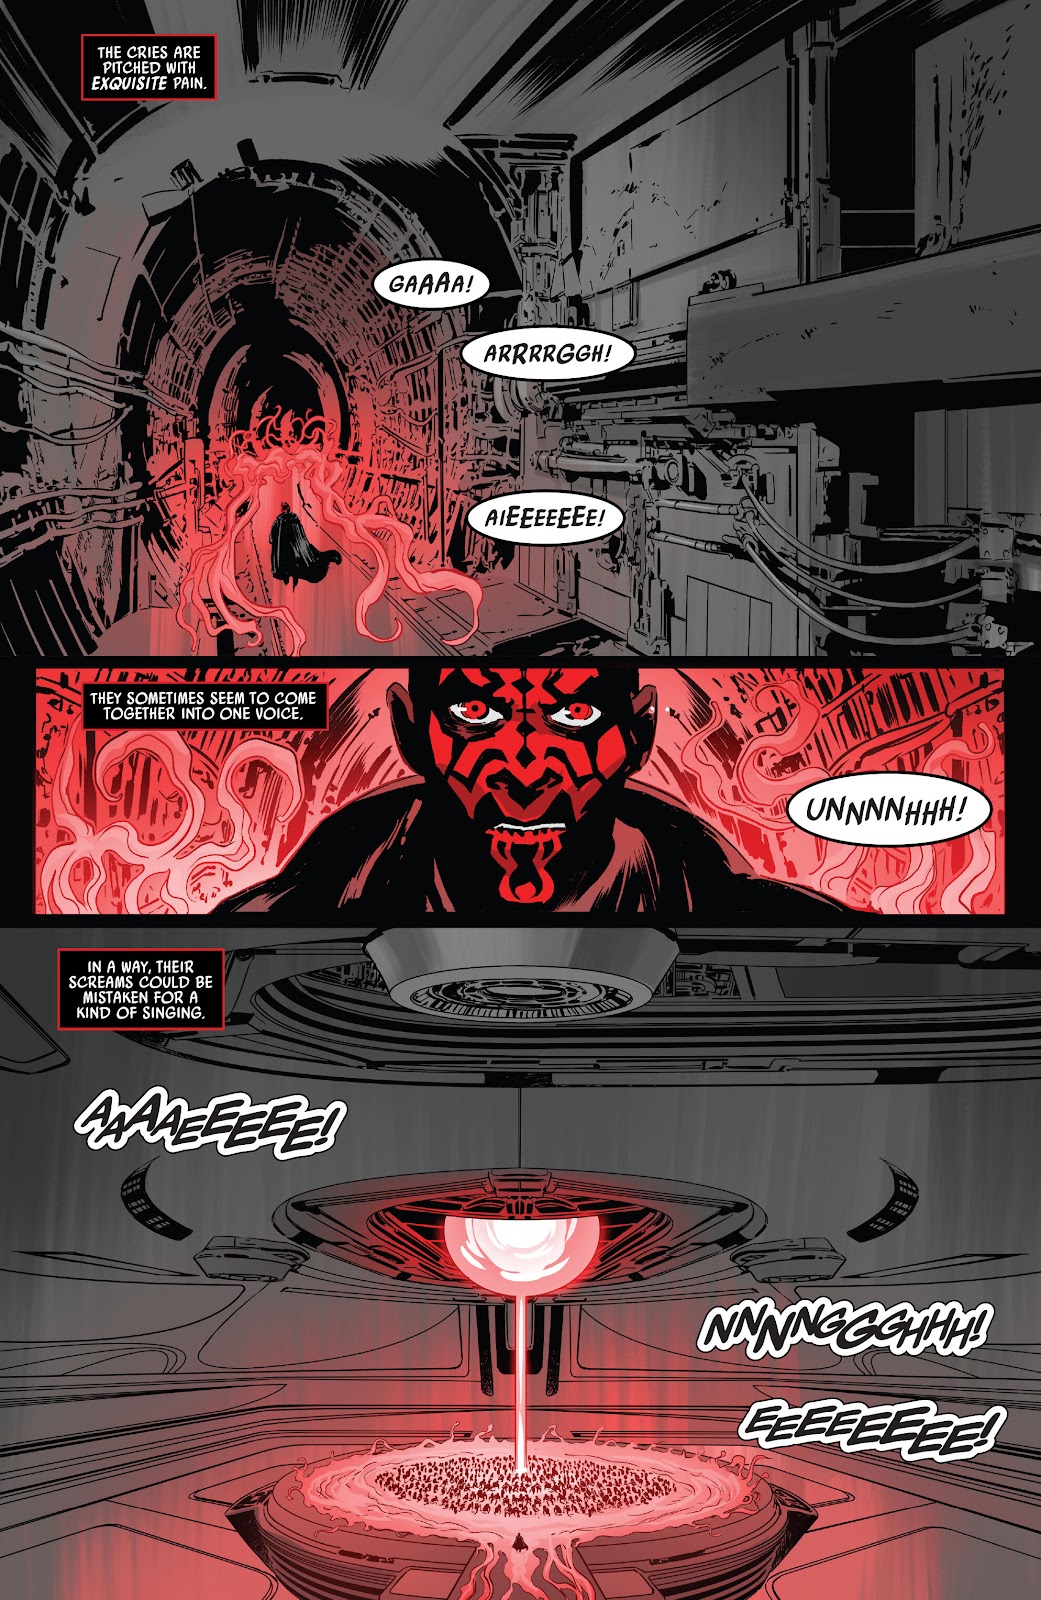 Star Wars: Darth Maul - Black, White & Red issue 1 - Page 23